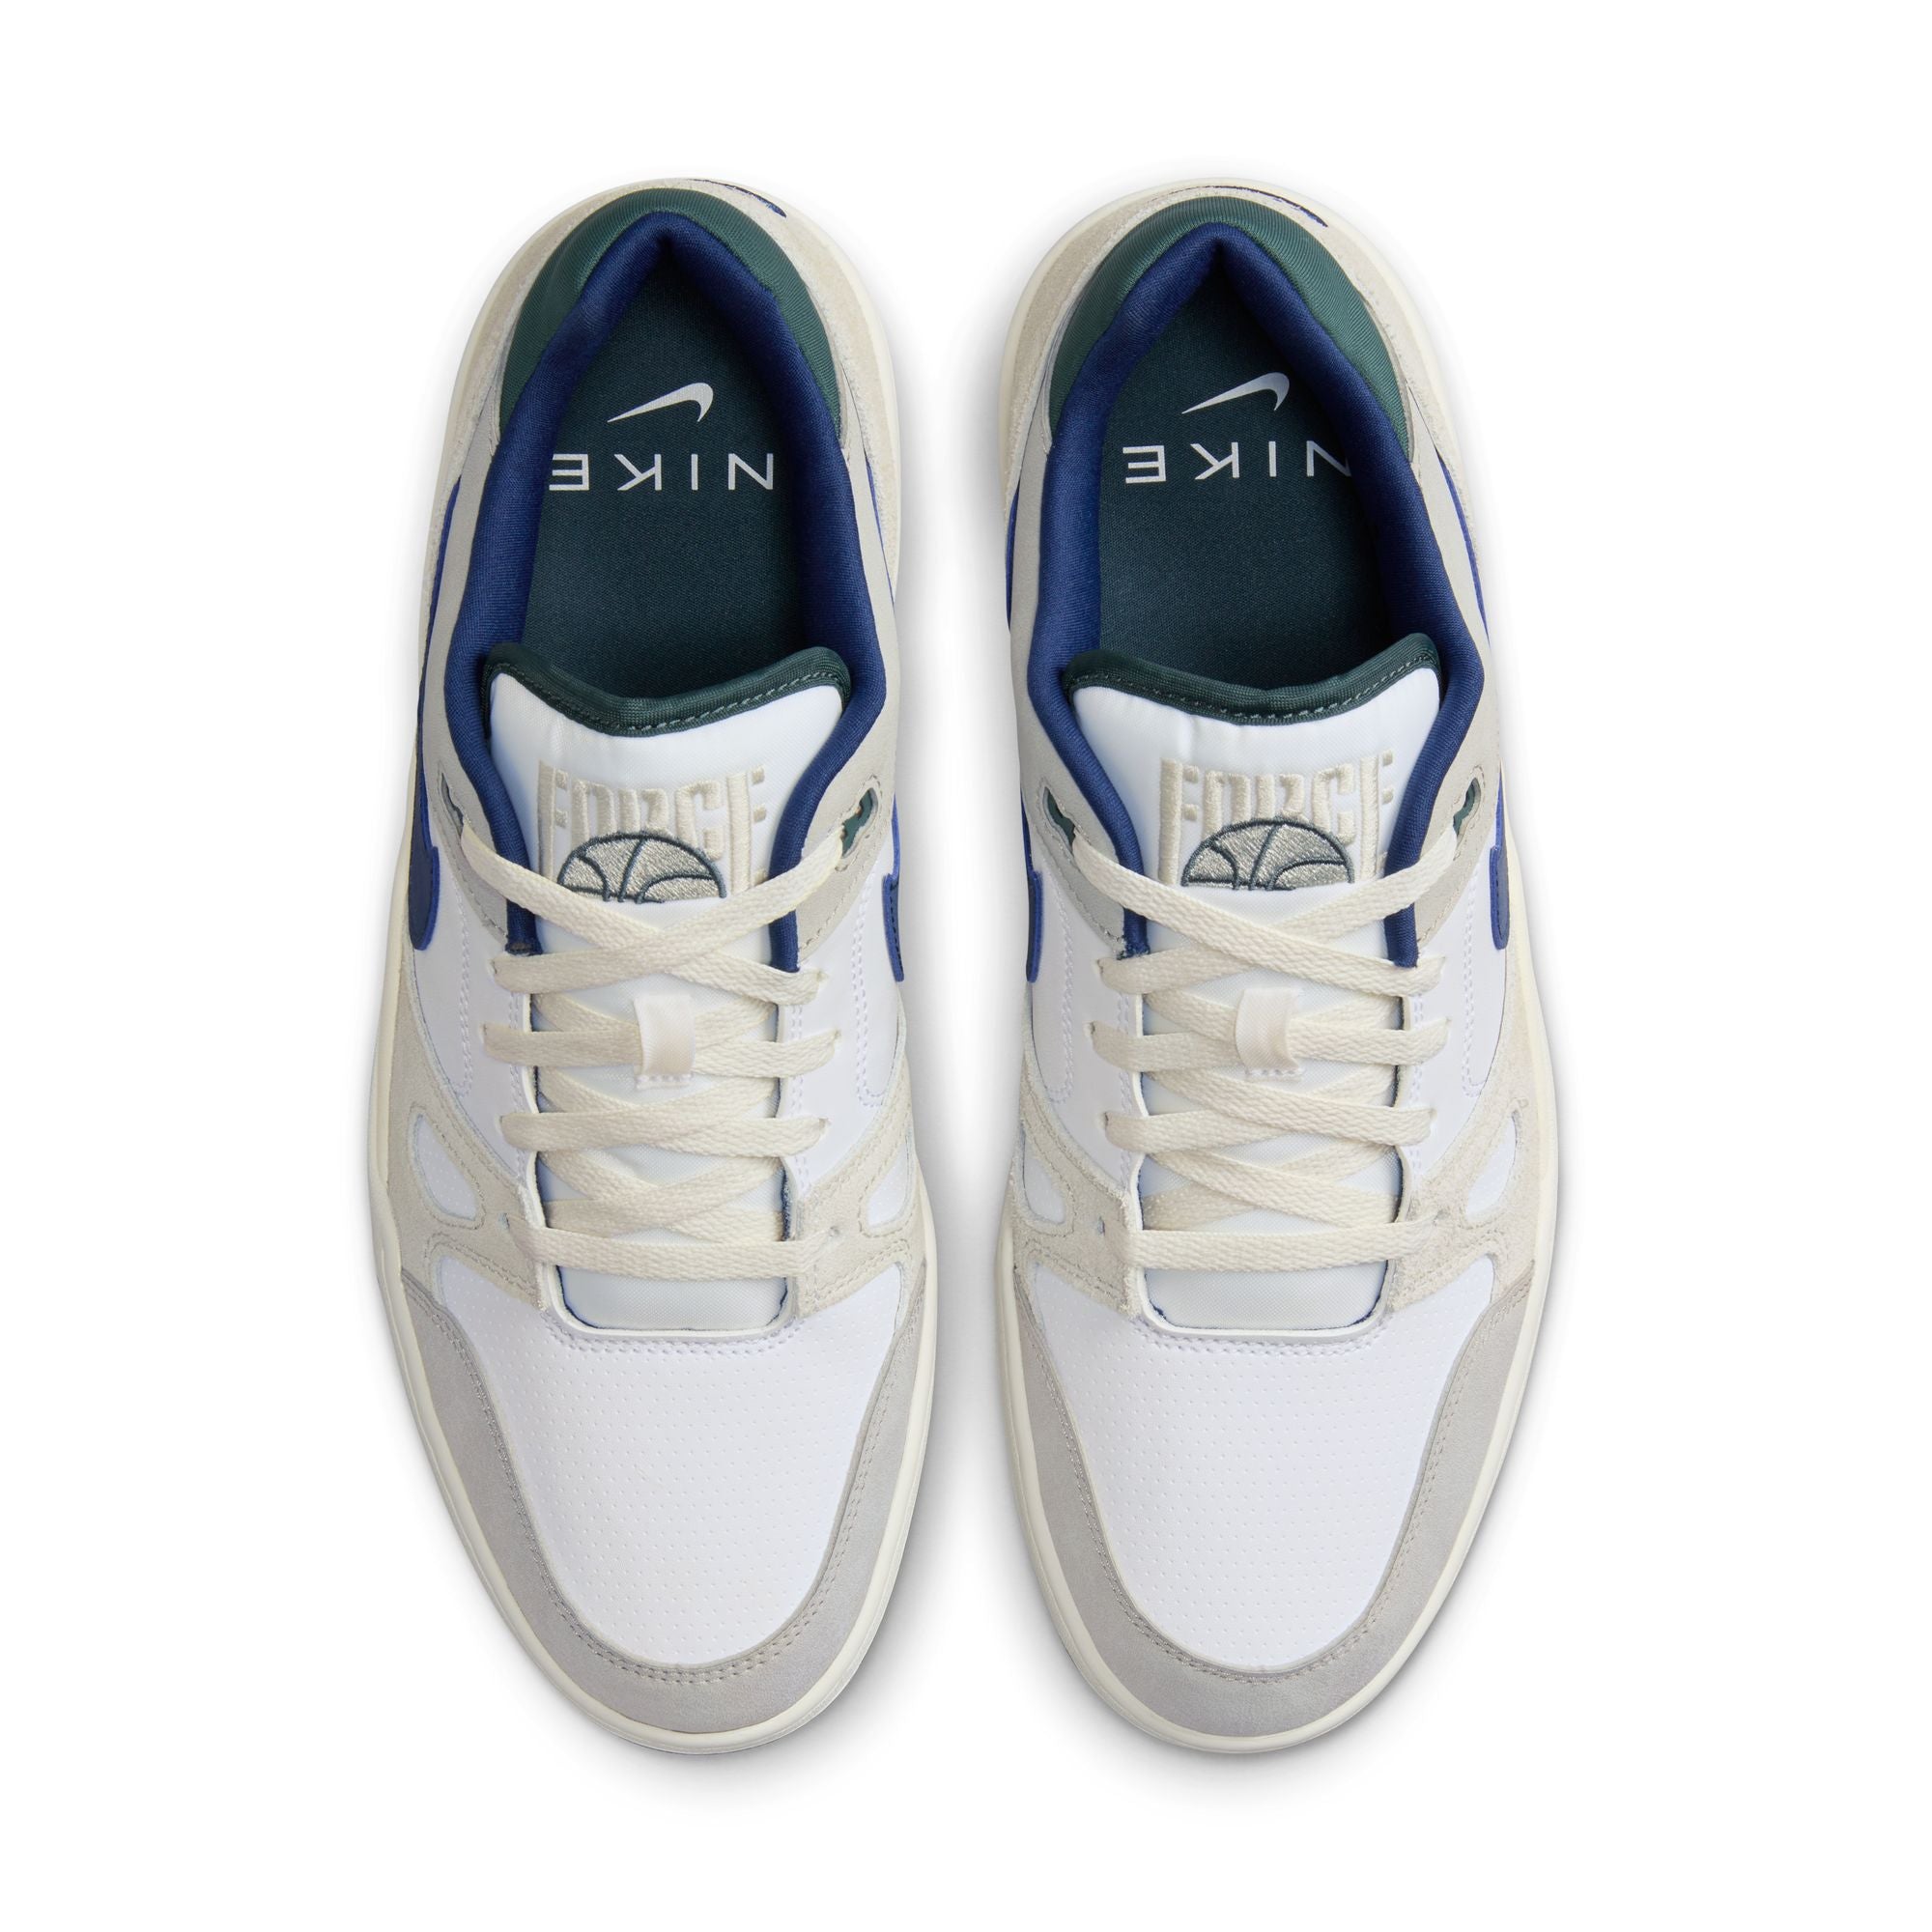 Full Force Low White/Midnight Navy